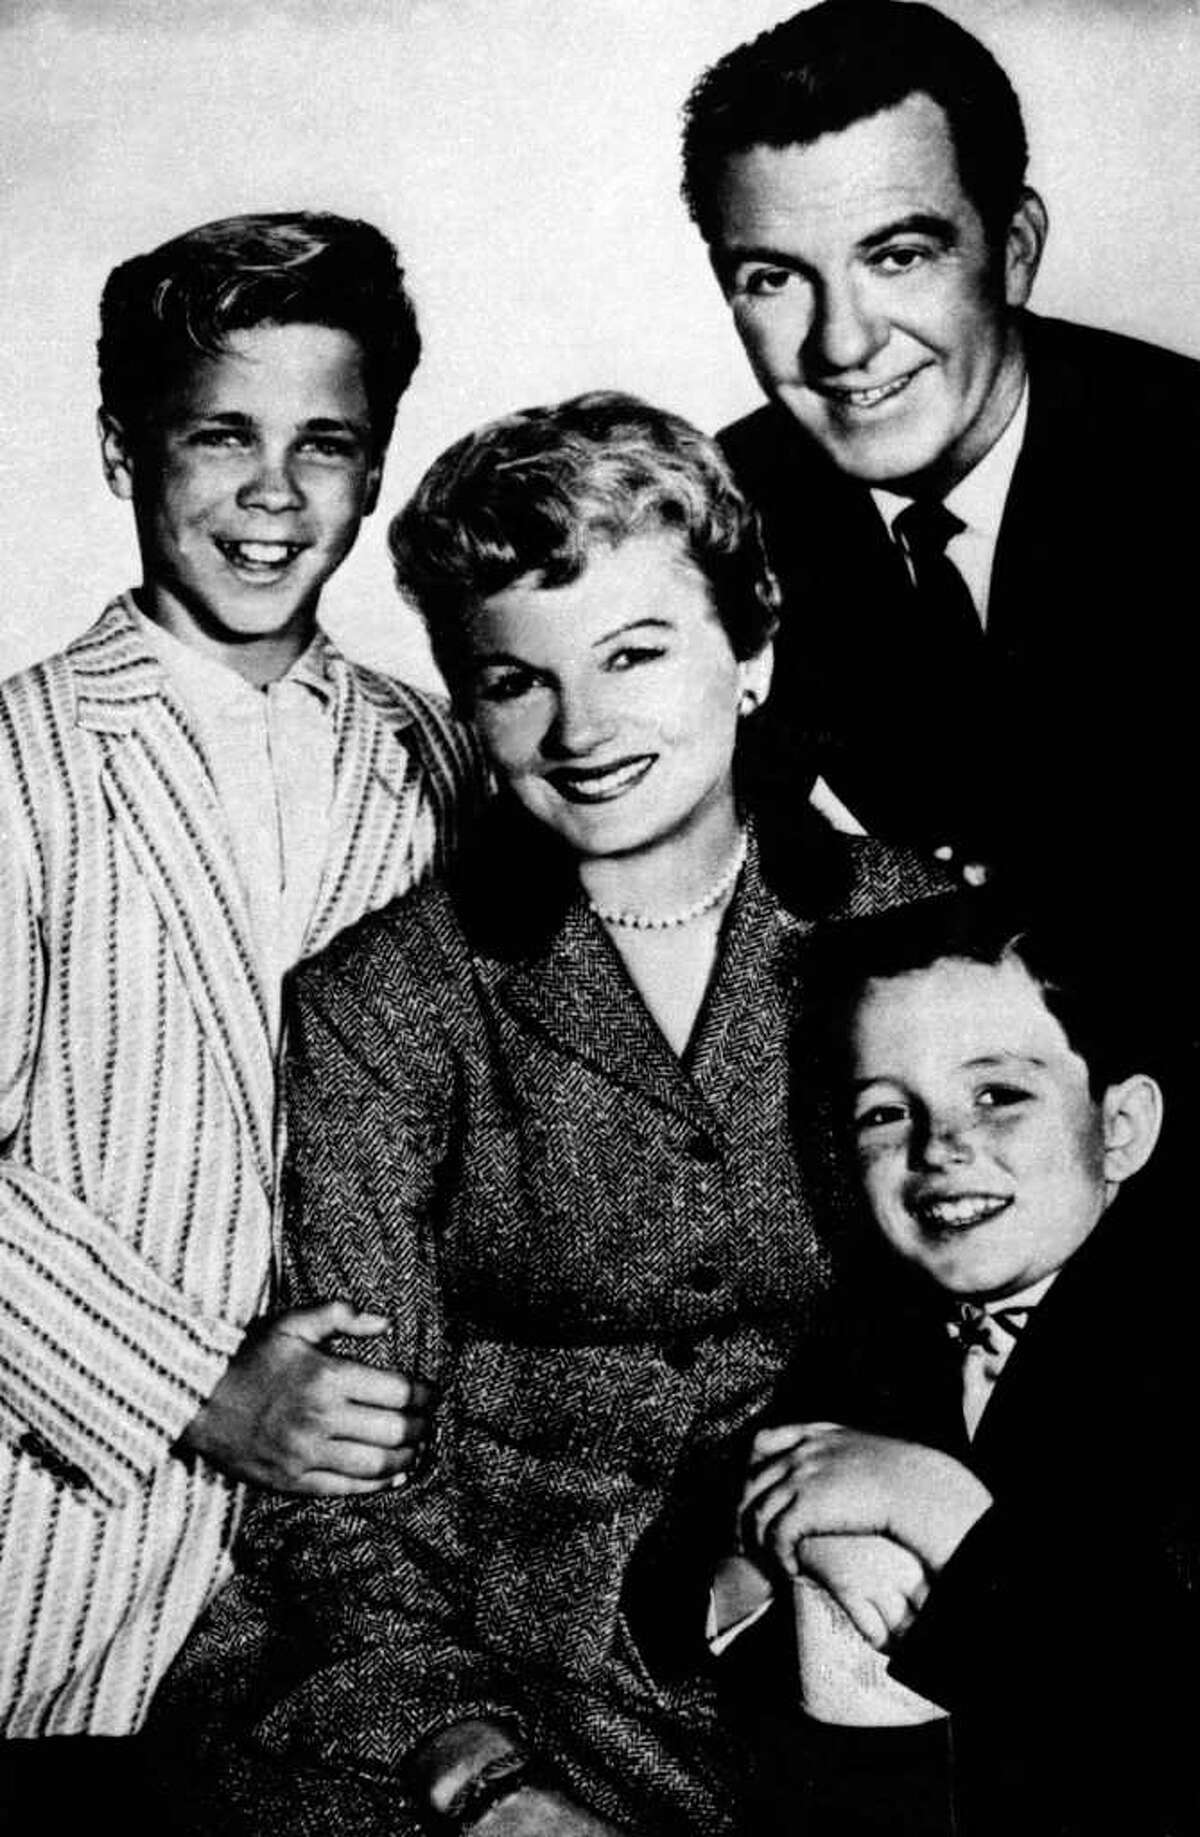 FILE - In this undated file photo, from left, Tony Dow as Wally, Barbara Billingsley as June, Hugh Beaumont as Ward and Jerry Mathers as Beaver, the cast of the TV series "Leave It to Beaver", pose for a publicity portrait. Billingsley, who gained the title supermom for her gentle portrayal of June Cleaver, the warm, supportive mother of a pair of precocious boys in "Leave it to Beaver," has died Saturday, Oct. 16, 2010. She was 94. (AP Photo/File)